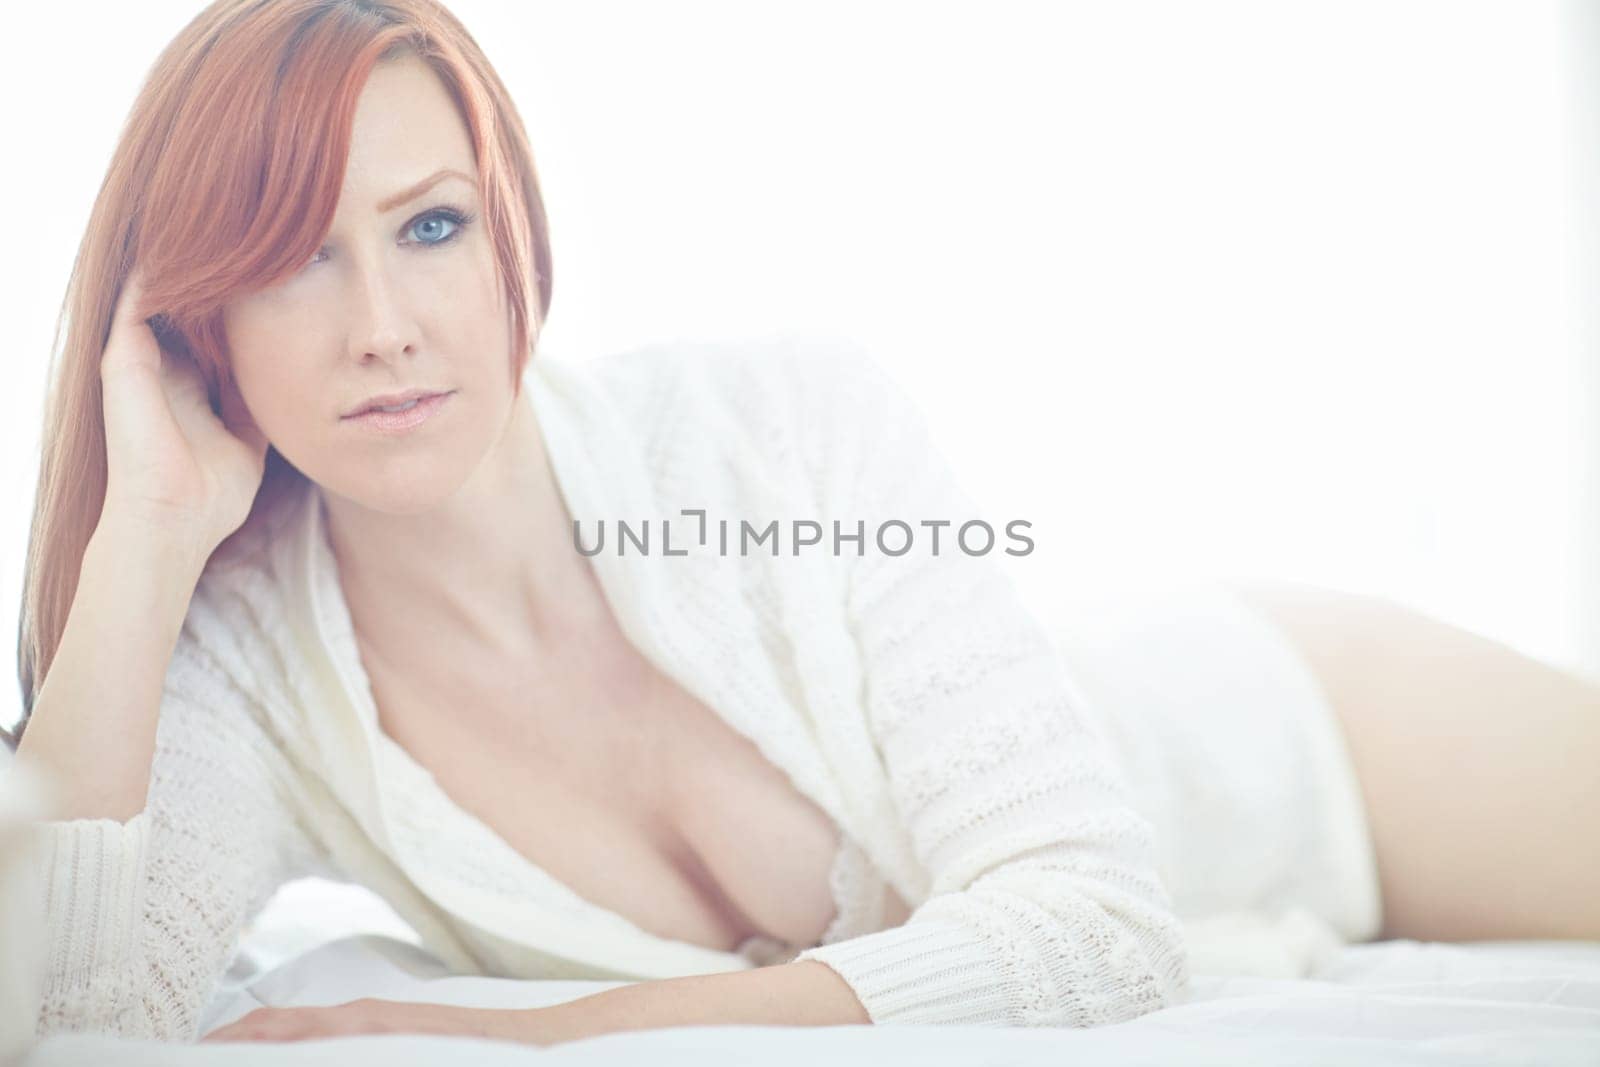 Sexy, woman and relax on bed with portrait in bedroom to rest on holiday or vacation for peace and calm. Girl, lingerie and jersey for aesthetic loungewear with flirty look, alluring and sensuality